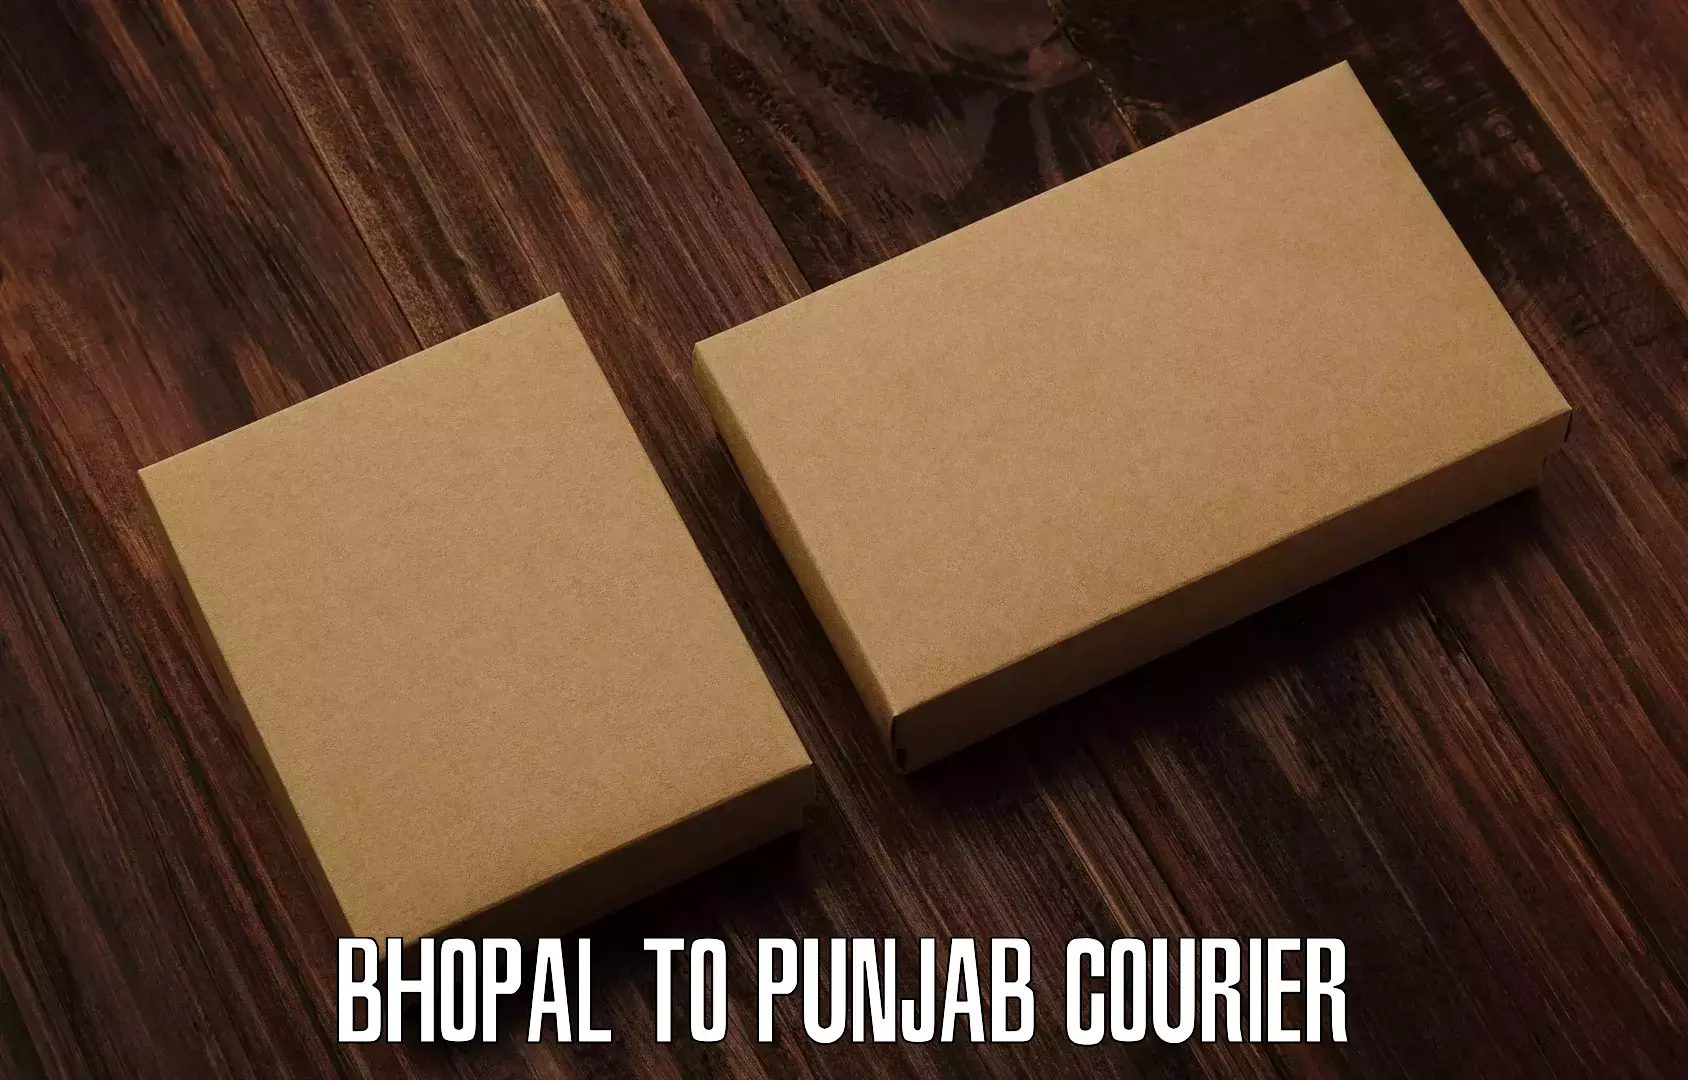 Courier service partnerships Bhopal to Punjab